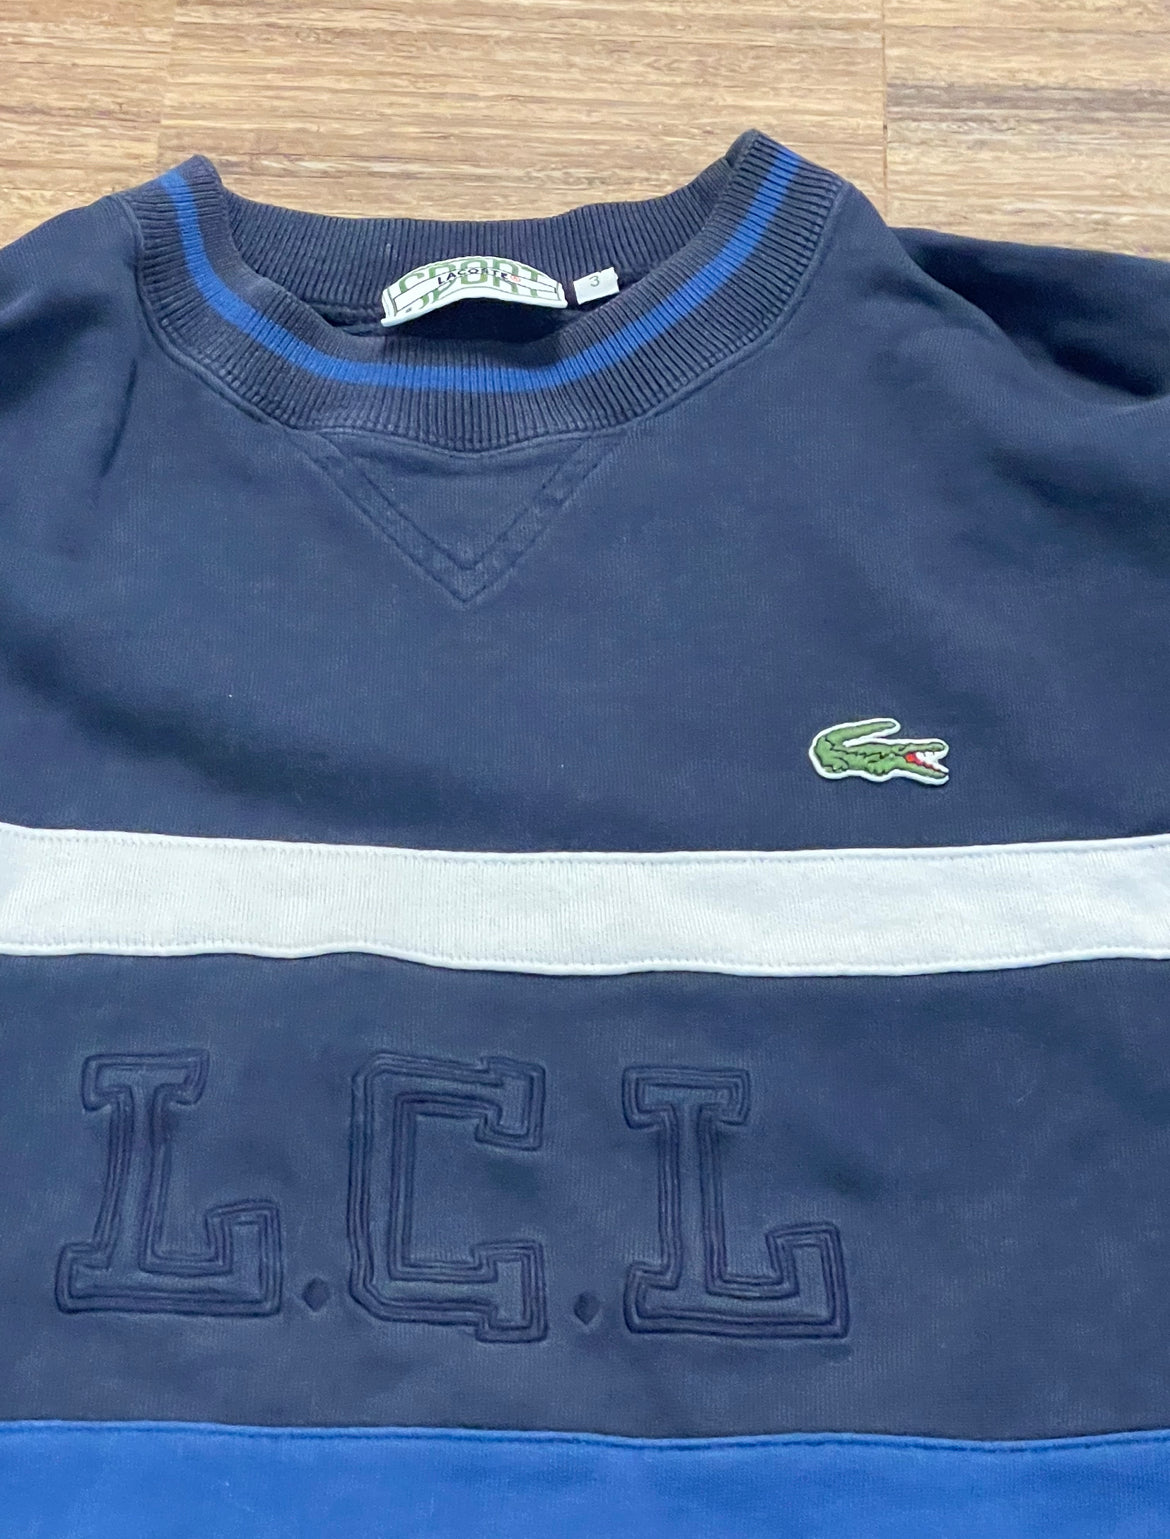 Lacoste Sweater (S)